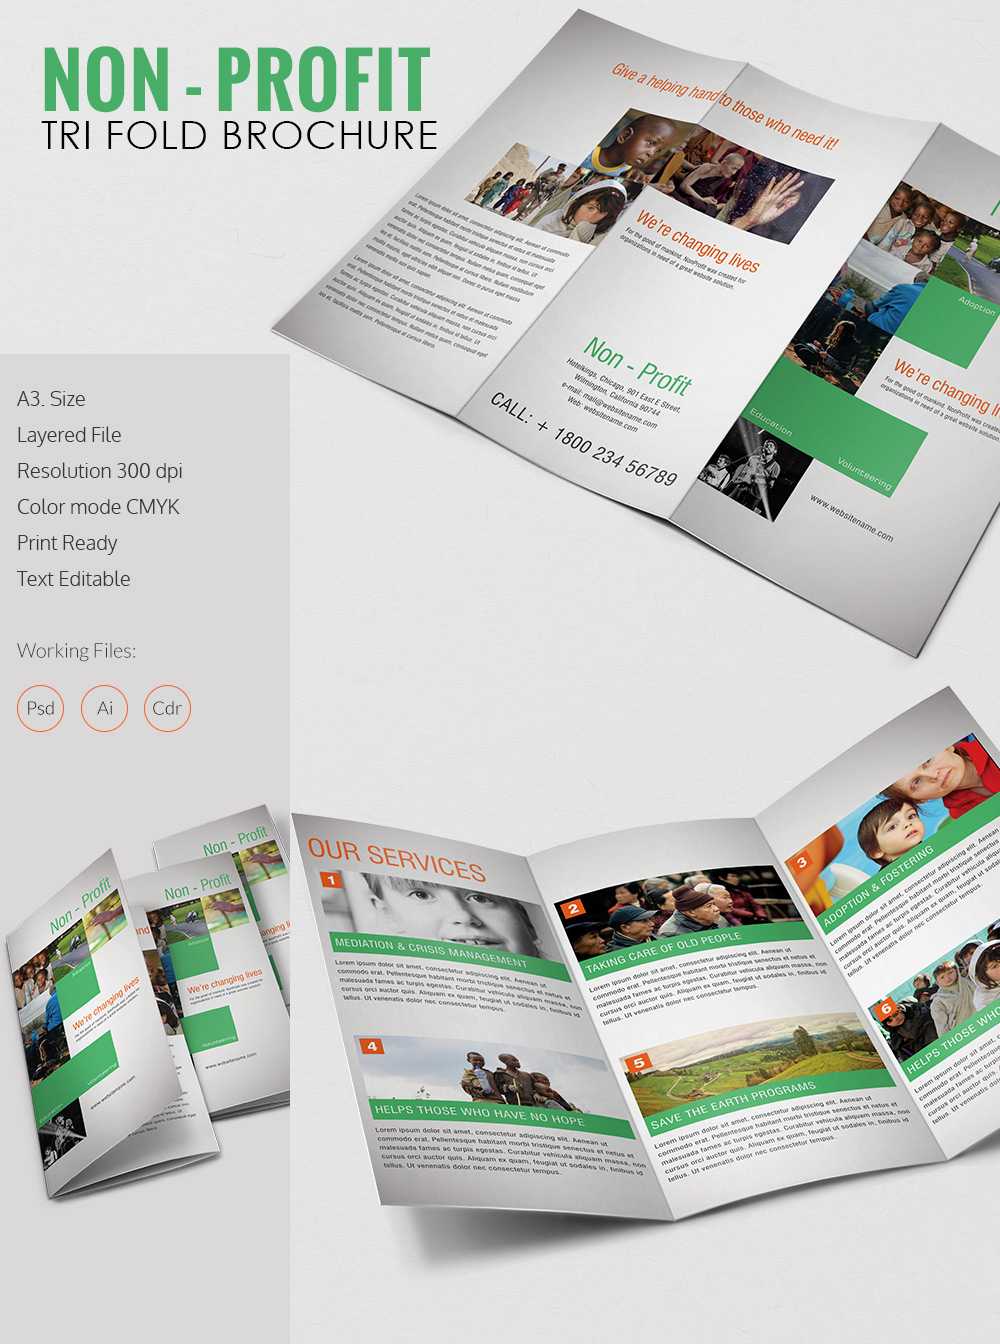 Amazing Non Profit A3 Tri Fold Brochure Template Download In Ngo Brochure Templates